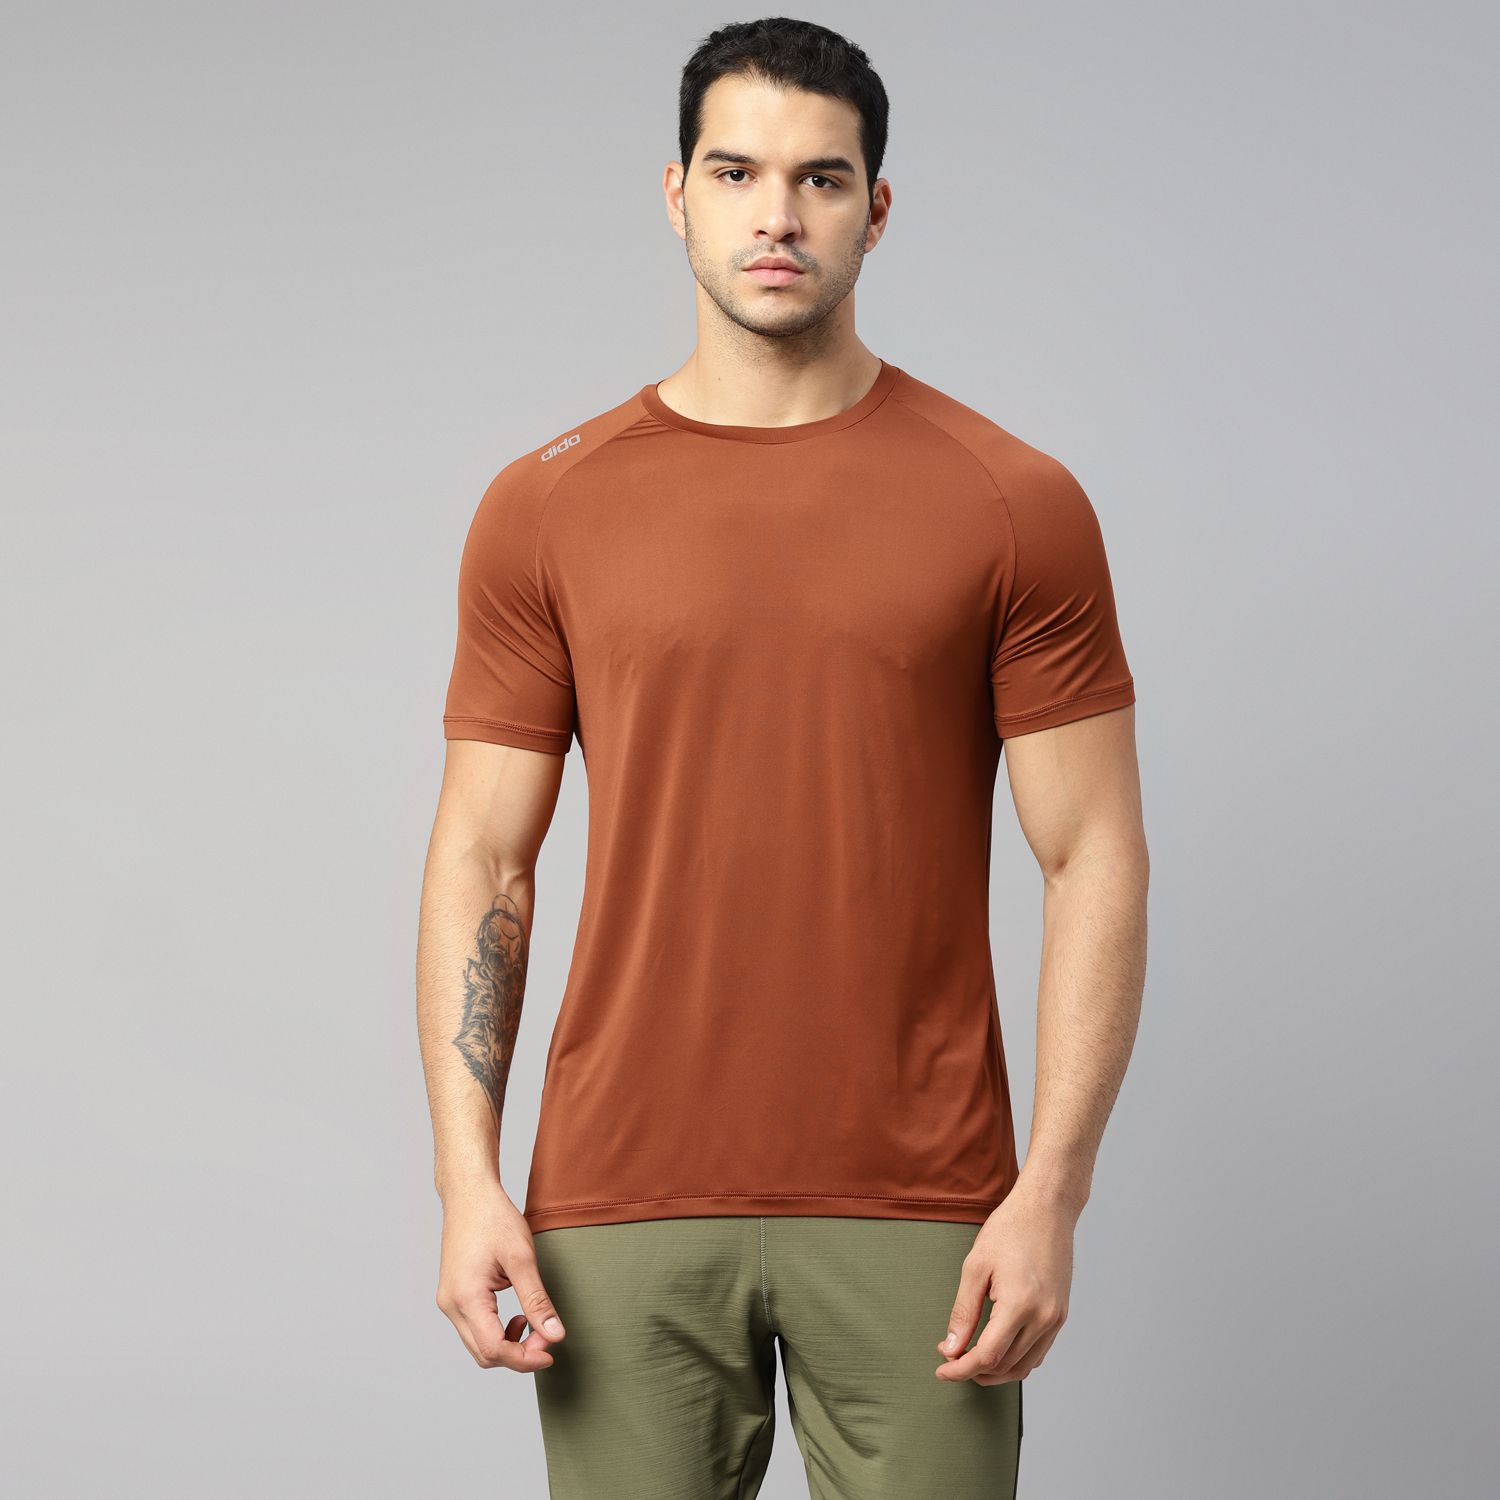     			Dida Sportswear Rust Polyester Regular Fit Men's Sports T-Shirt ( Pack of 1 )